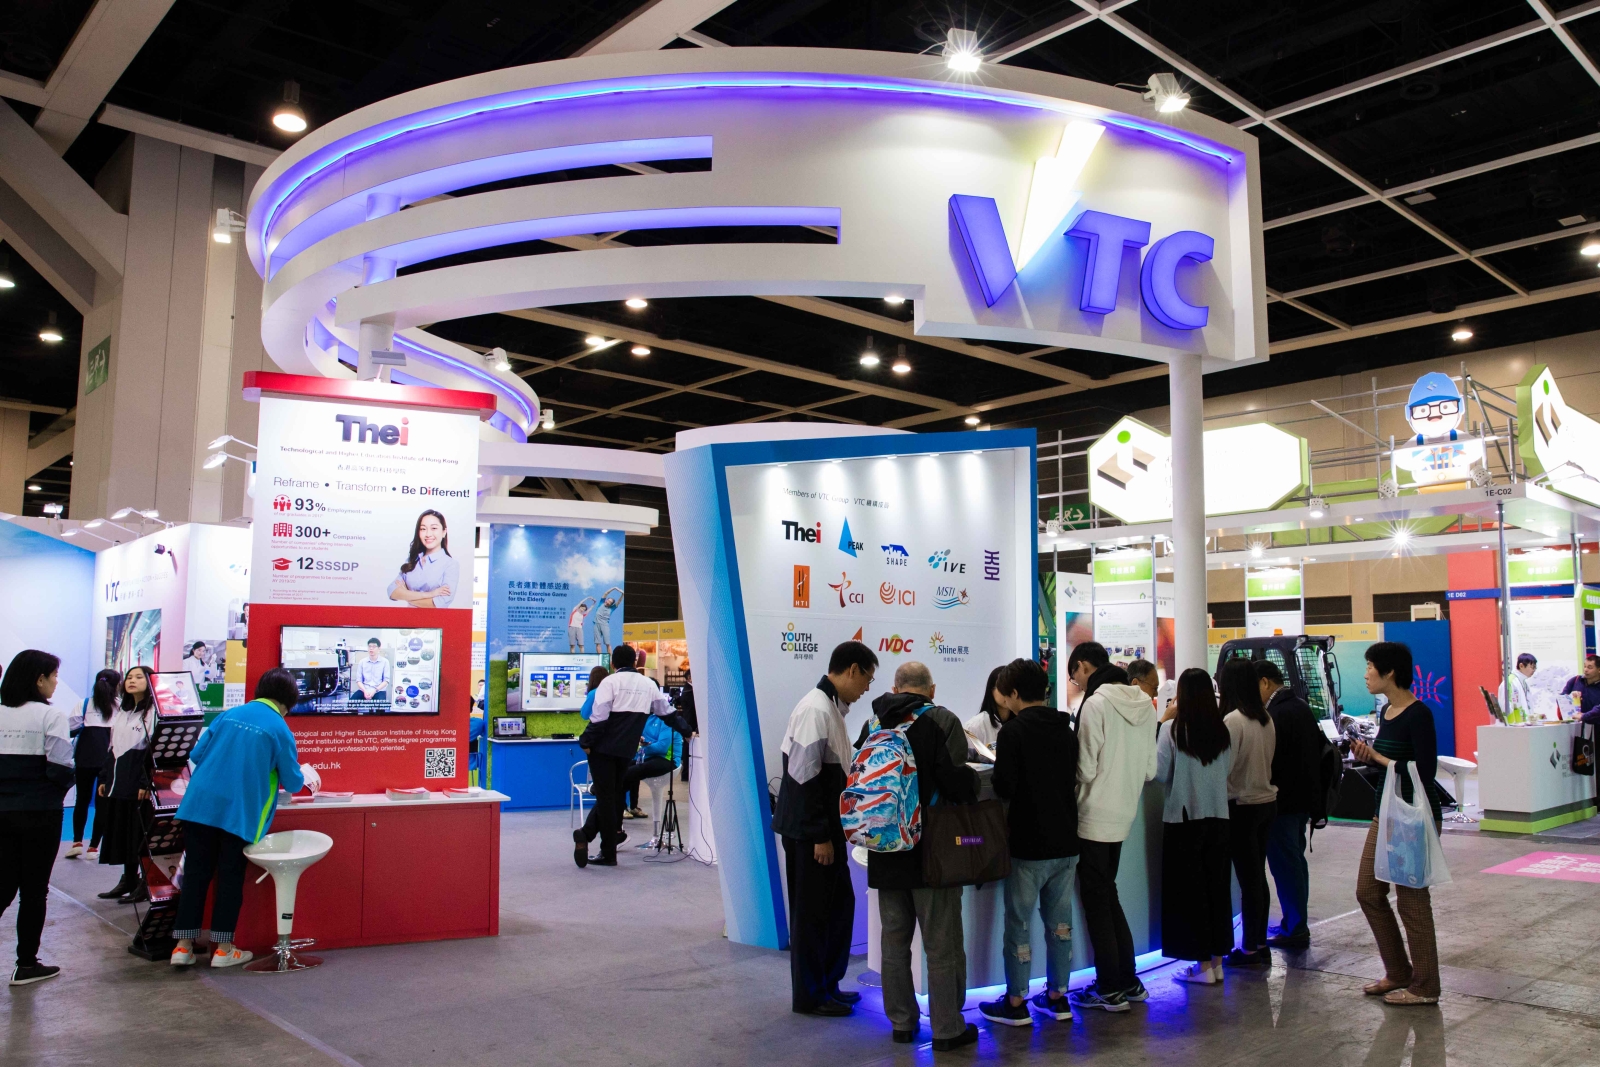 The VTC booth, themed “Skilling Talent for a Smart Future” this year, showcases the VTC’s latest progress in teaching and learning including technology-enabled learning, the nurturing of creative thinking, and the promotion of interdisciplinary collaborations